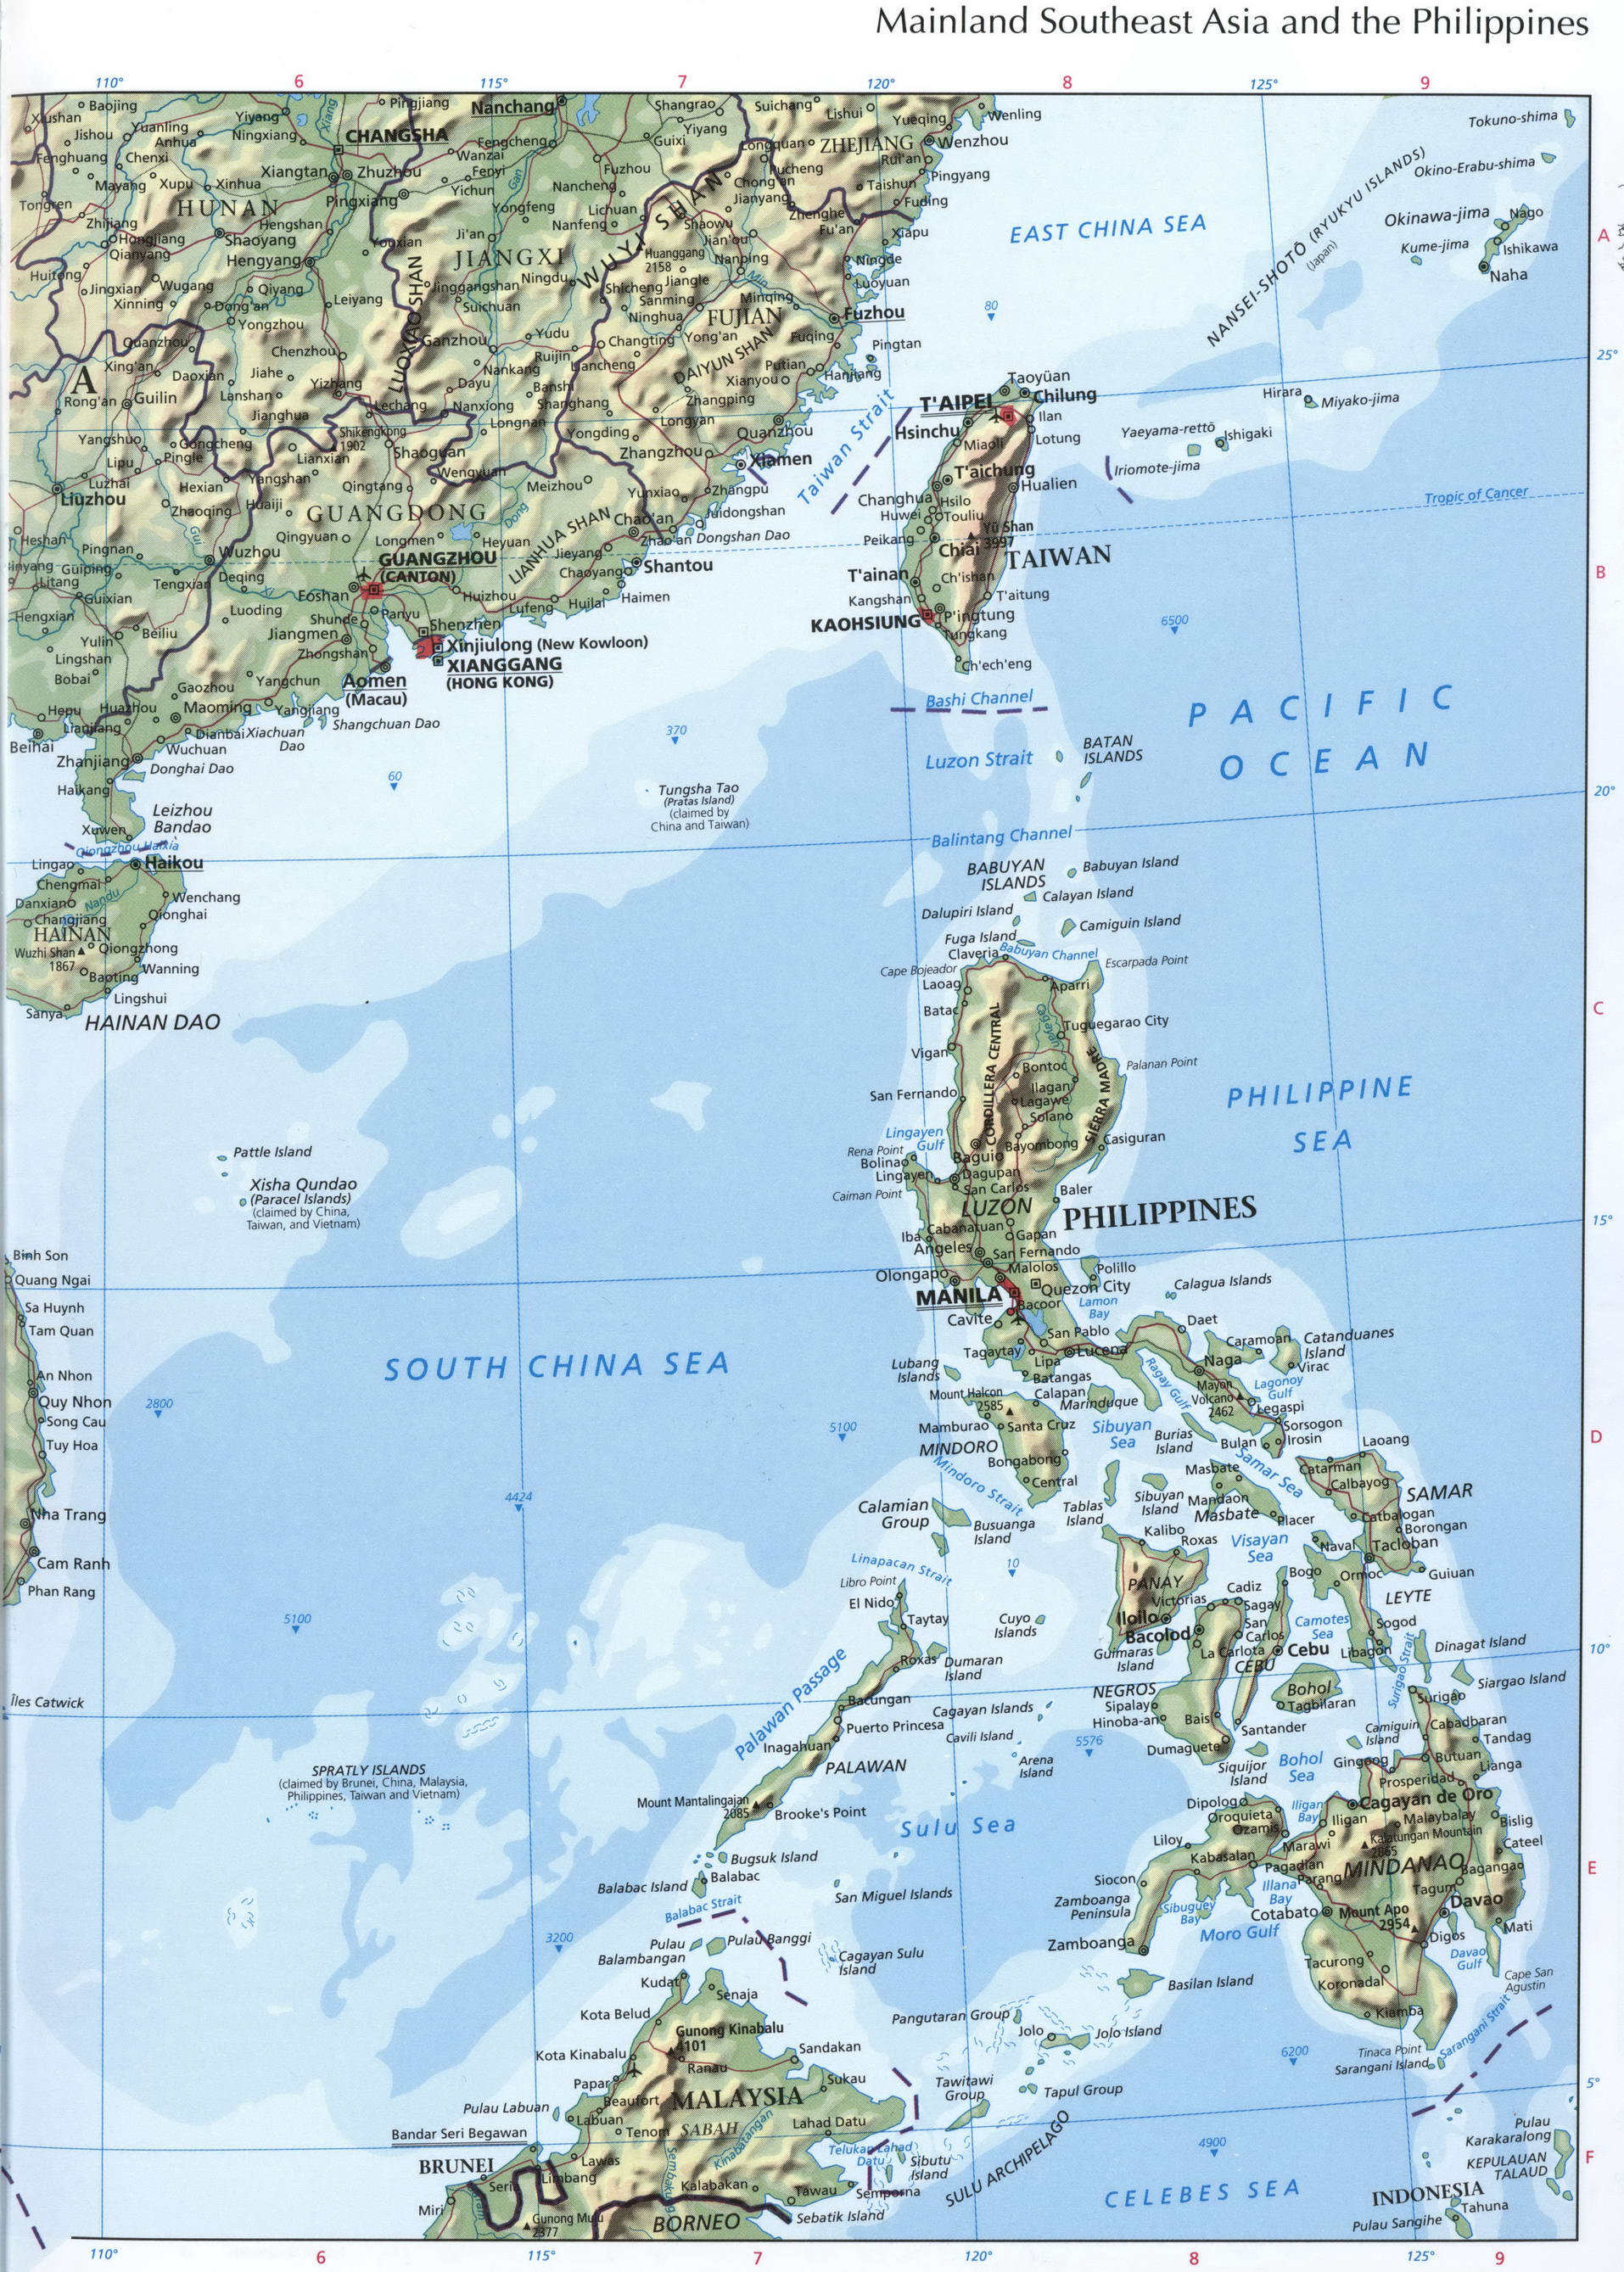 Mainland Southeast Asia and Philippines map